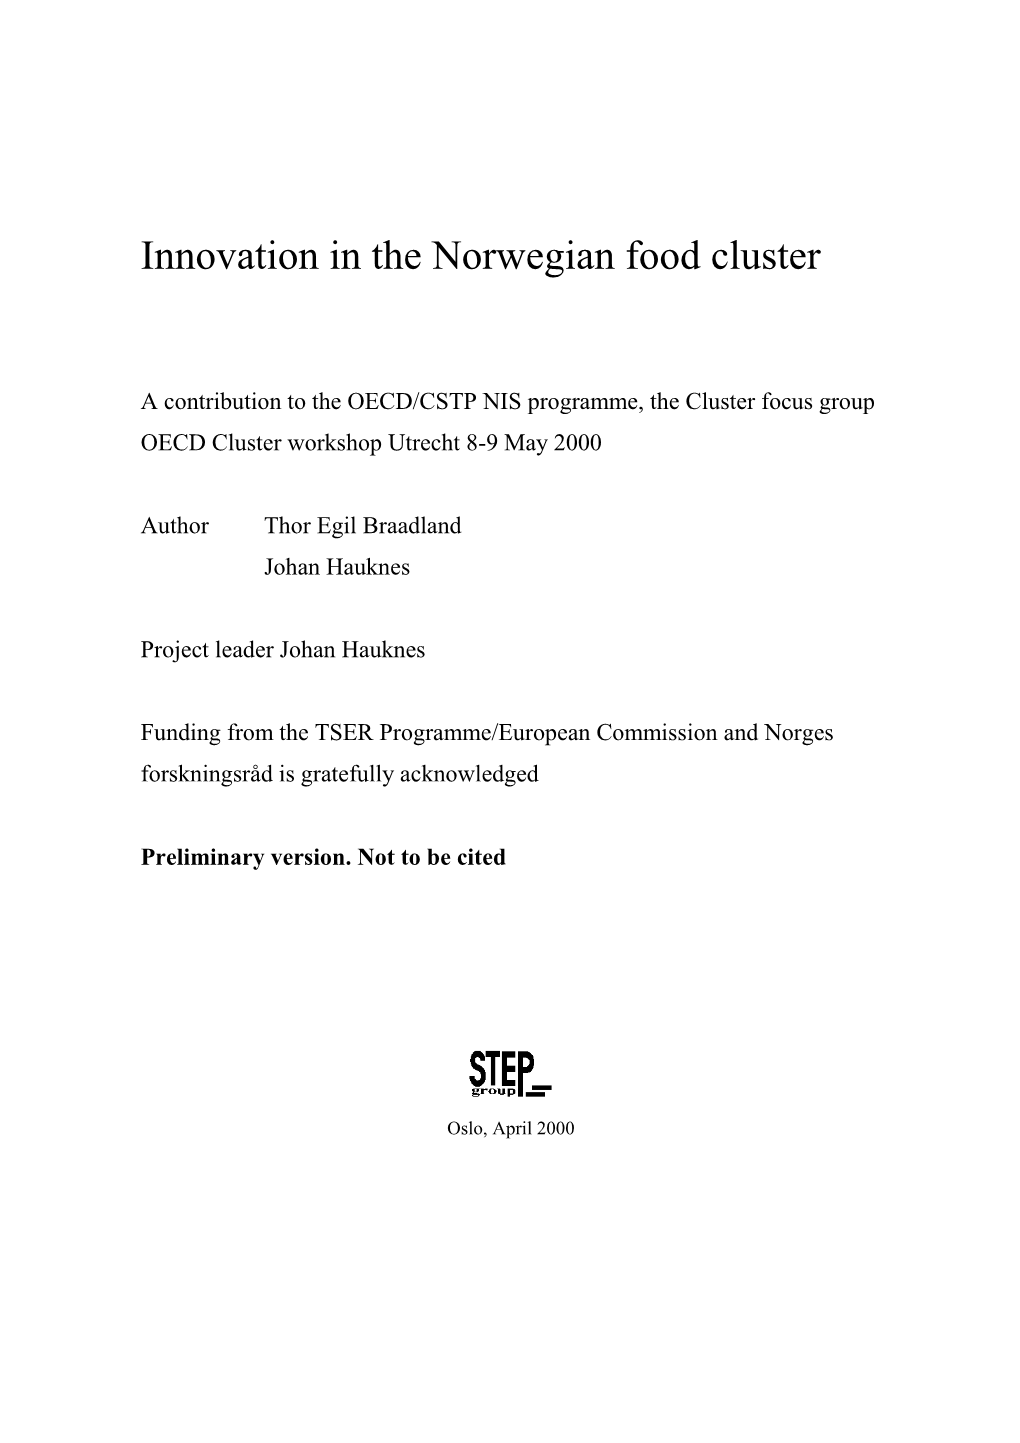 Innovation in the Norwegian Food Cluster